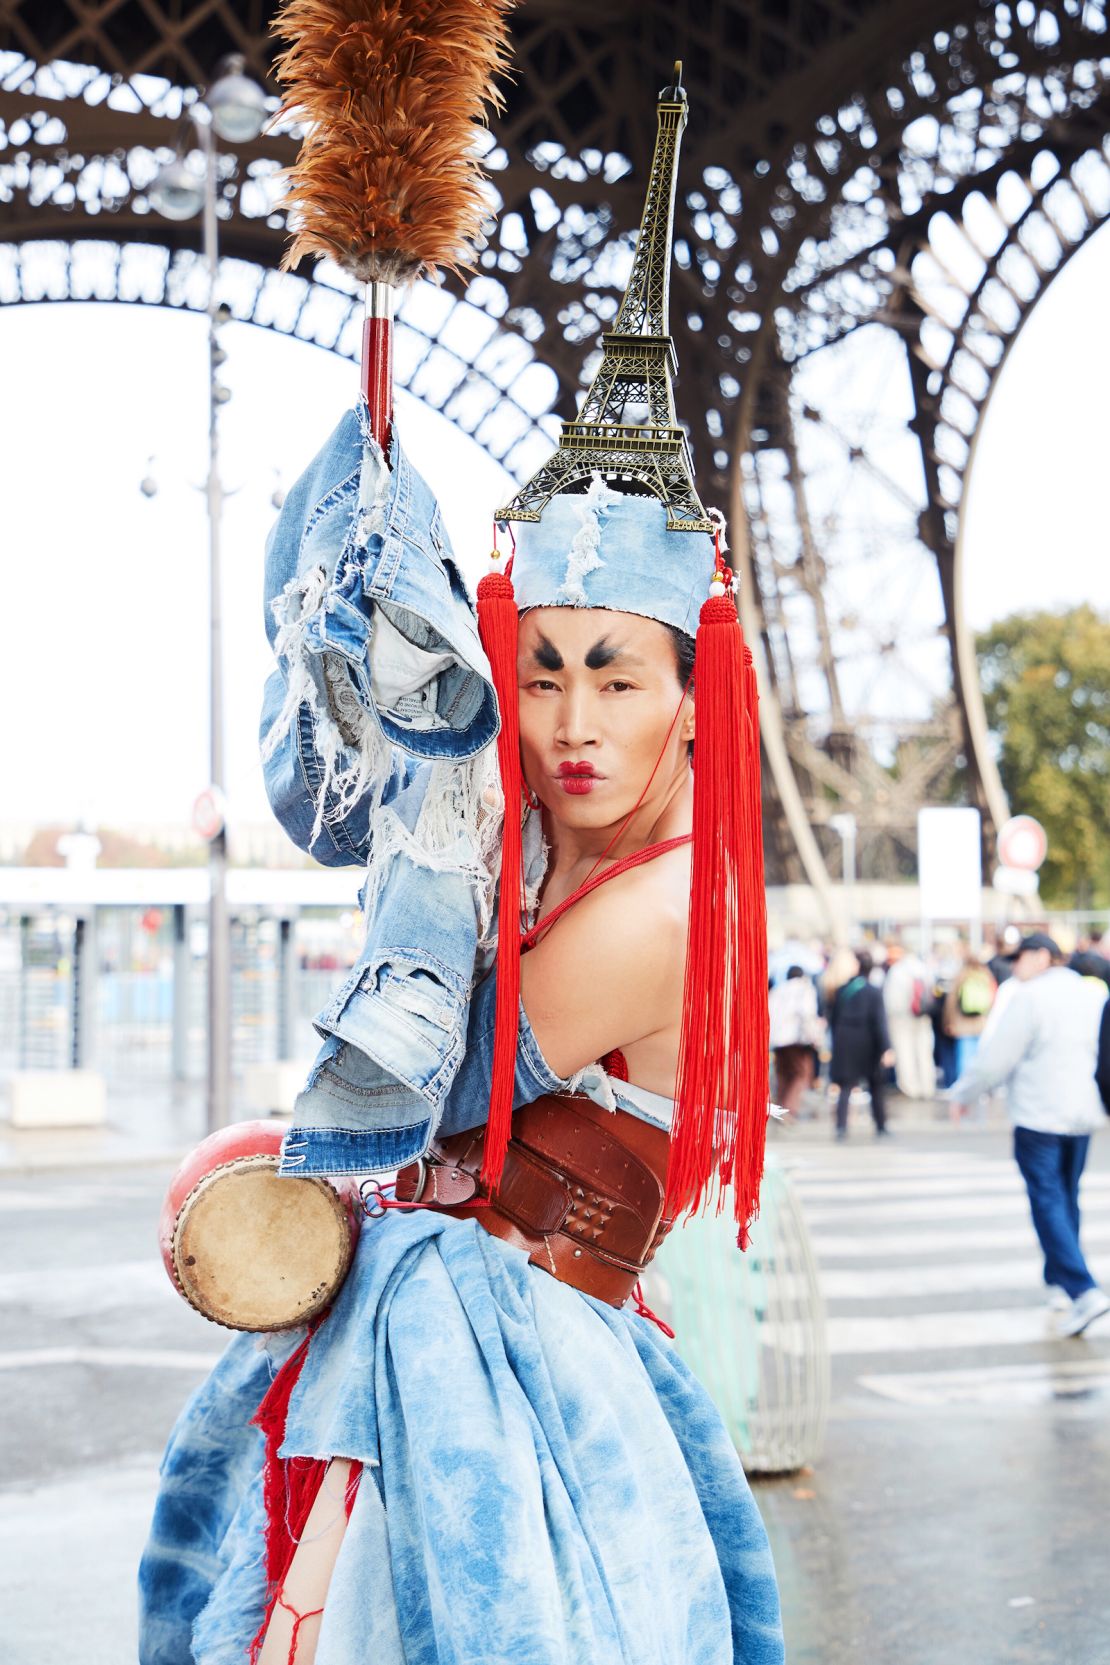 An outfit made of recycled denim, a miniature Eiffel Tower and long, red Chinese tassels.